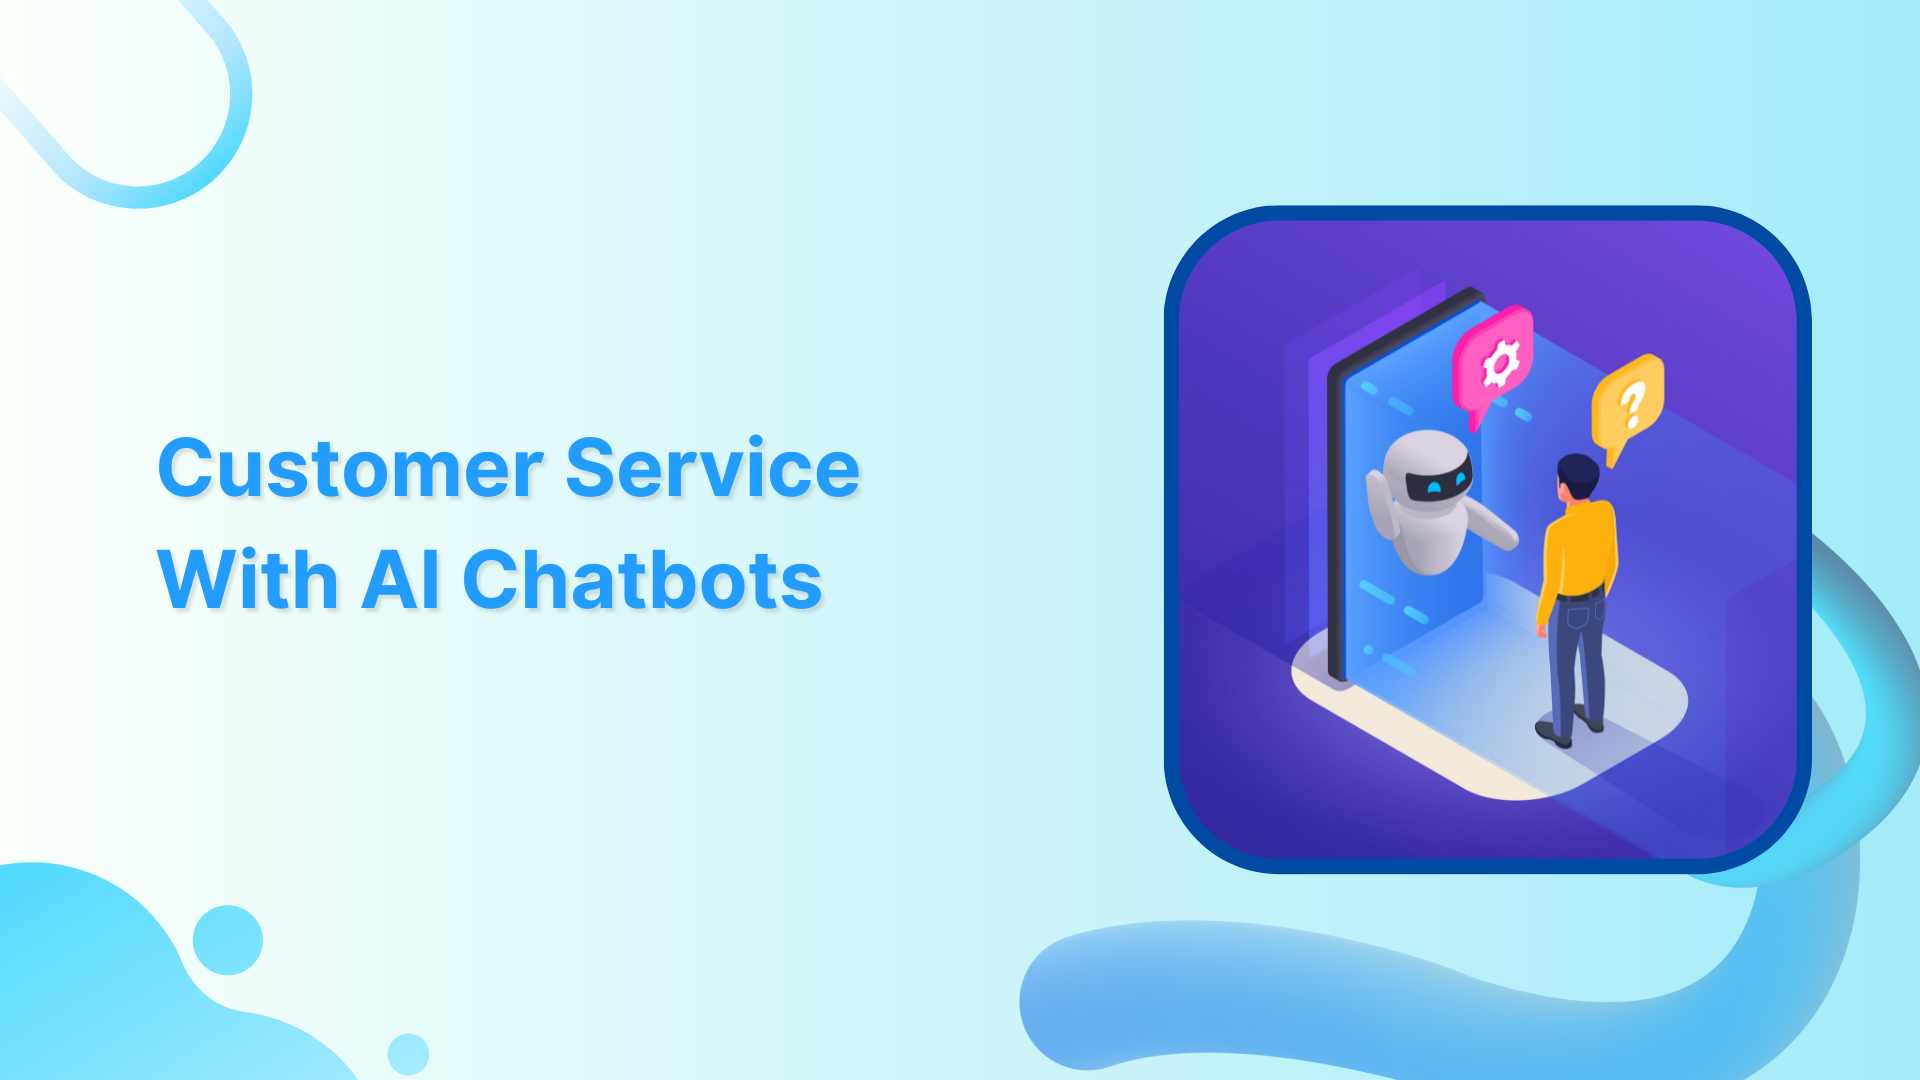 Customer Service With AI Chatbots